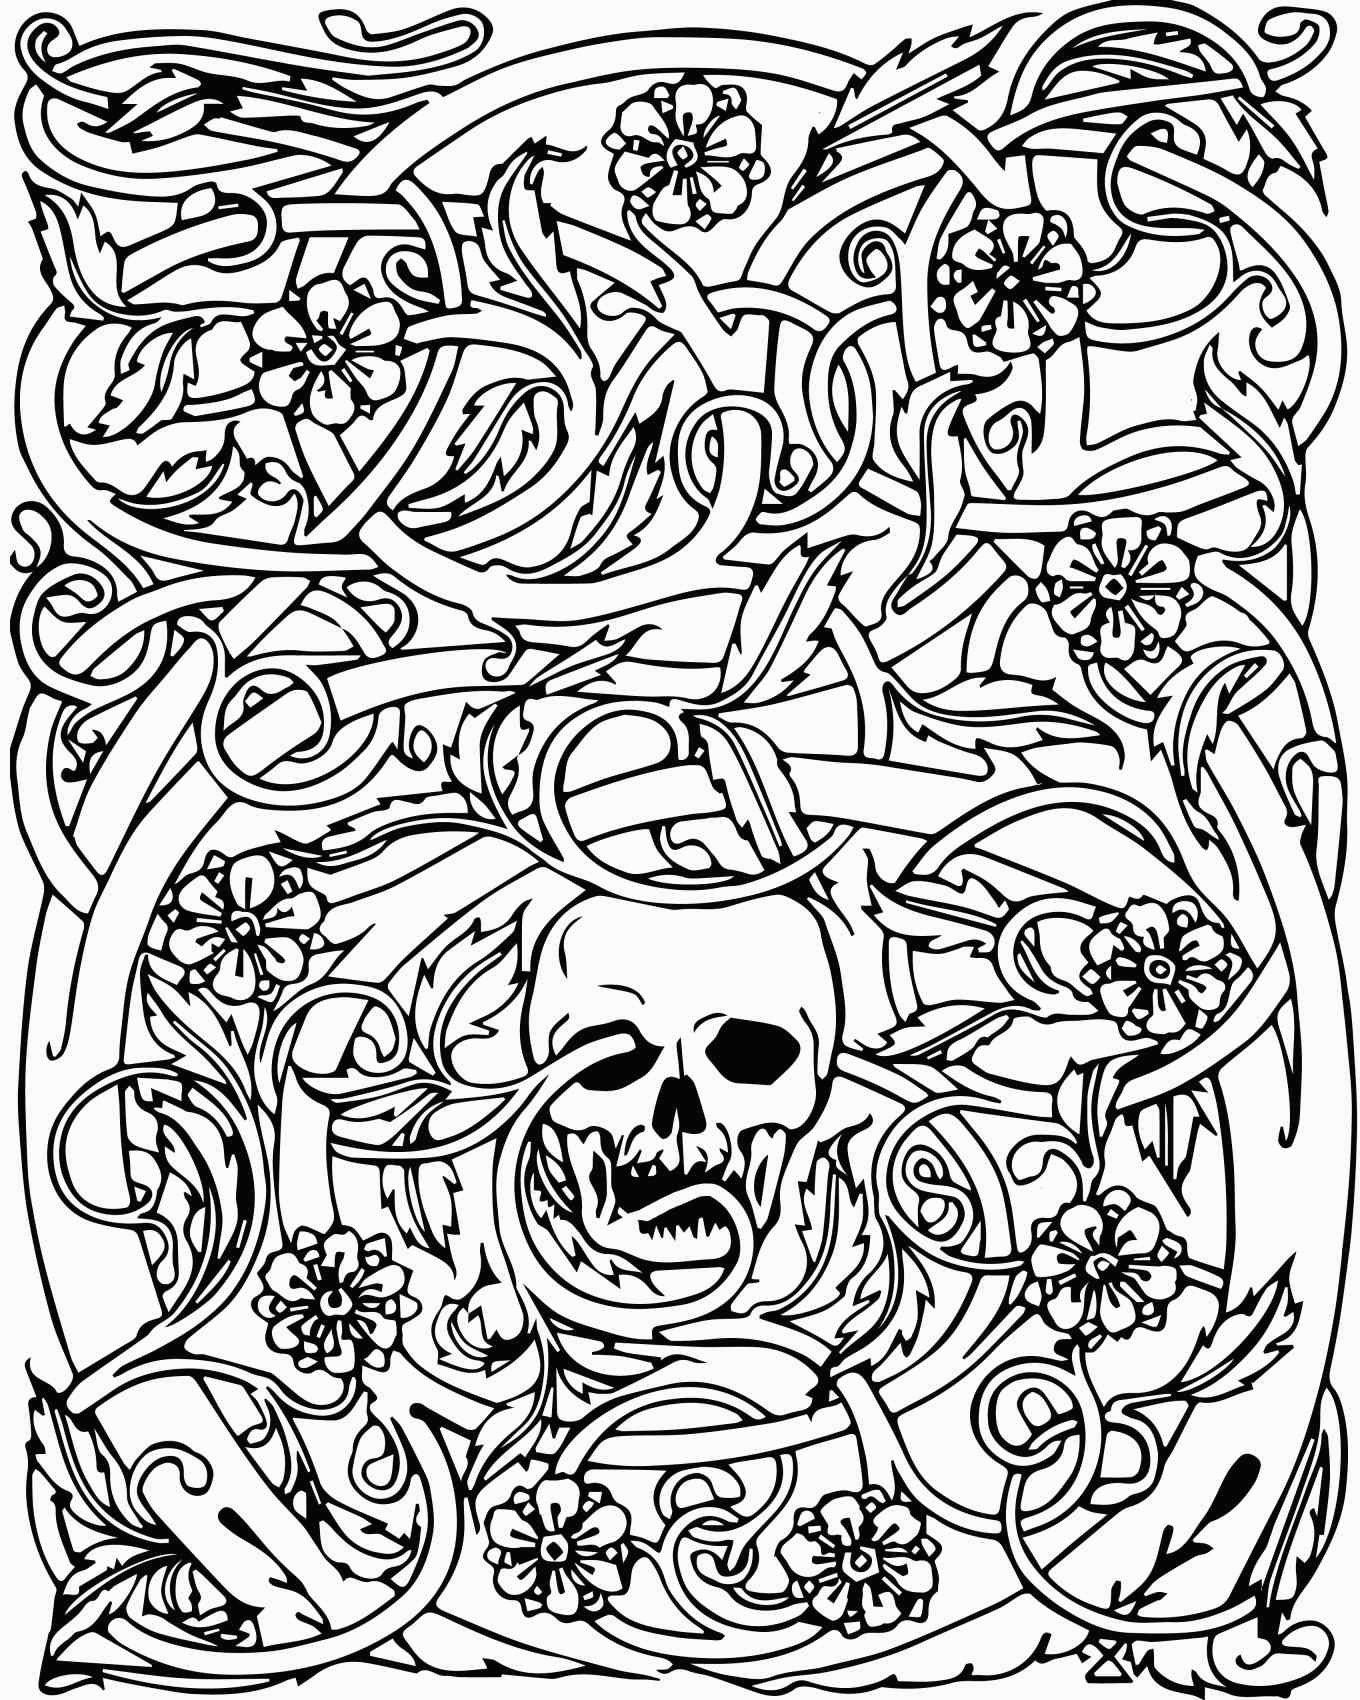 Download Skull Coloring Pages for Adults - Best Coloring Pages For Kids